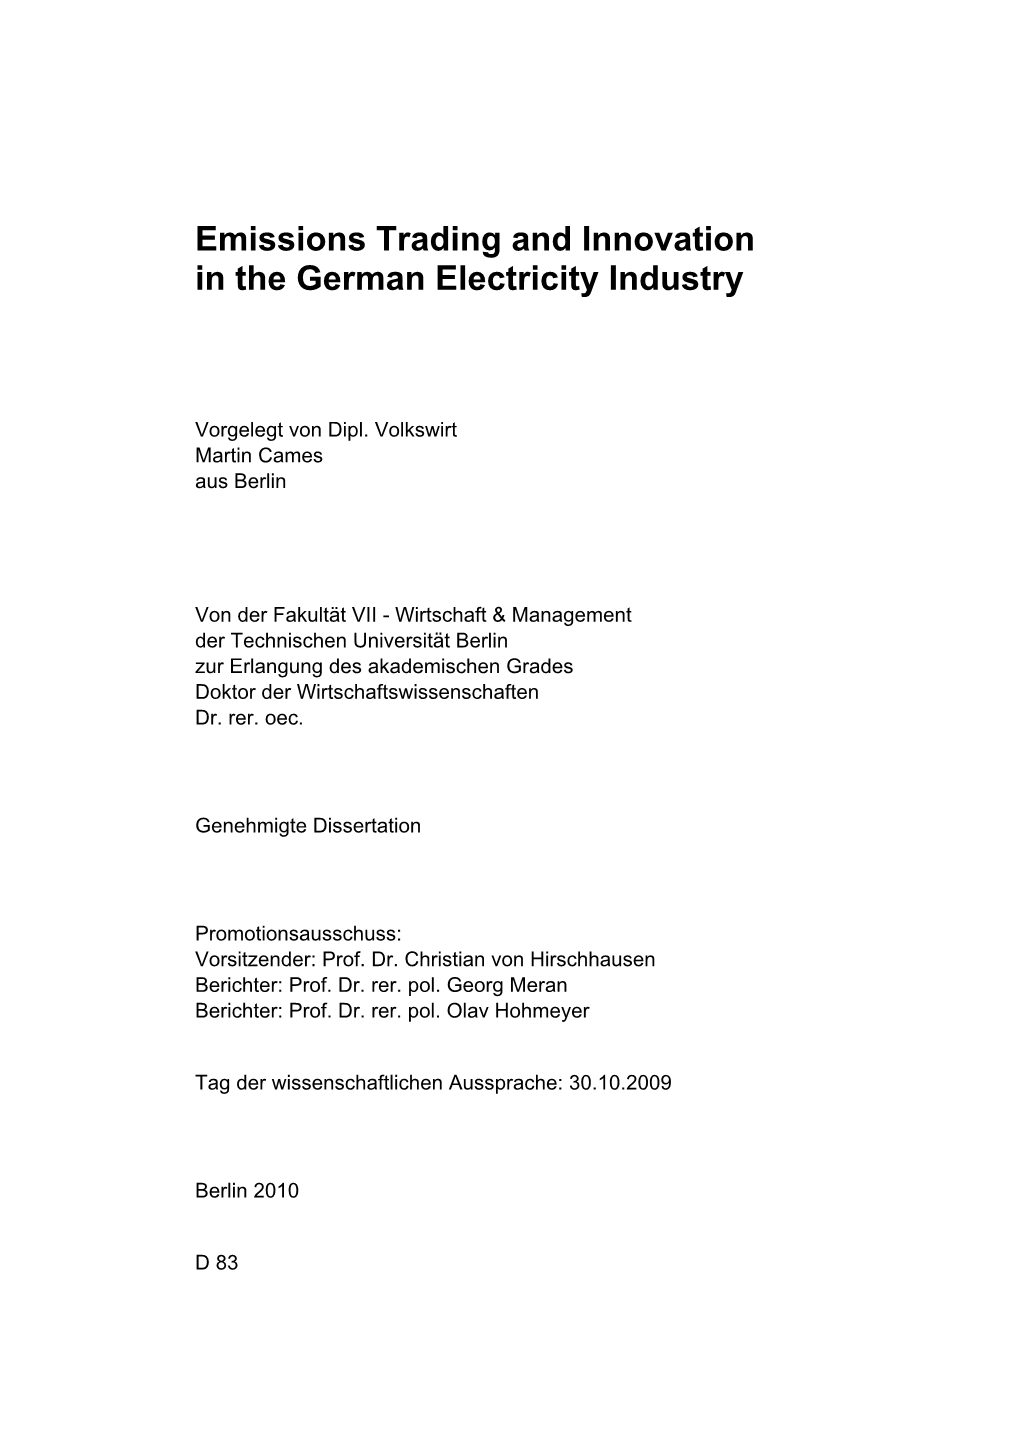 Emissions Trading and Innovation in the German Electricity Industry